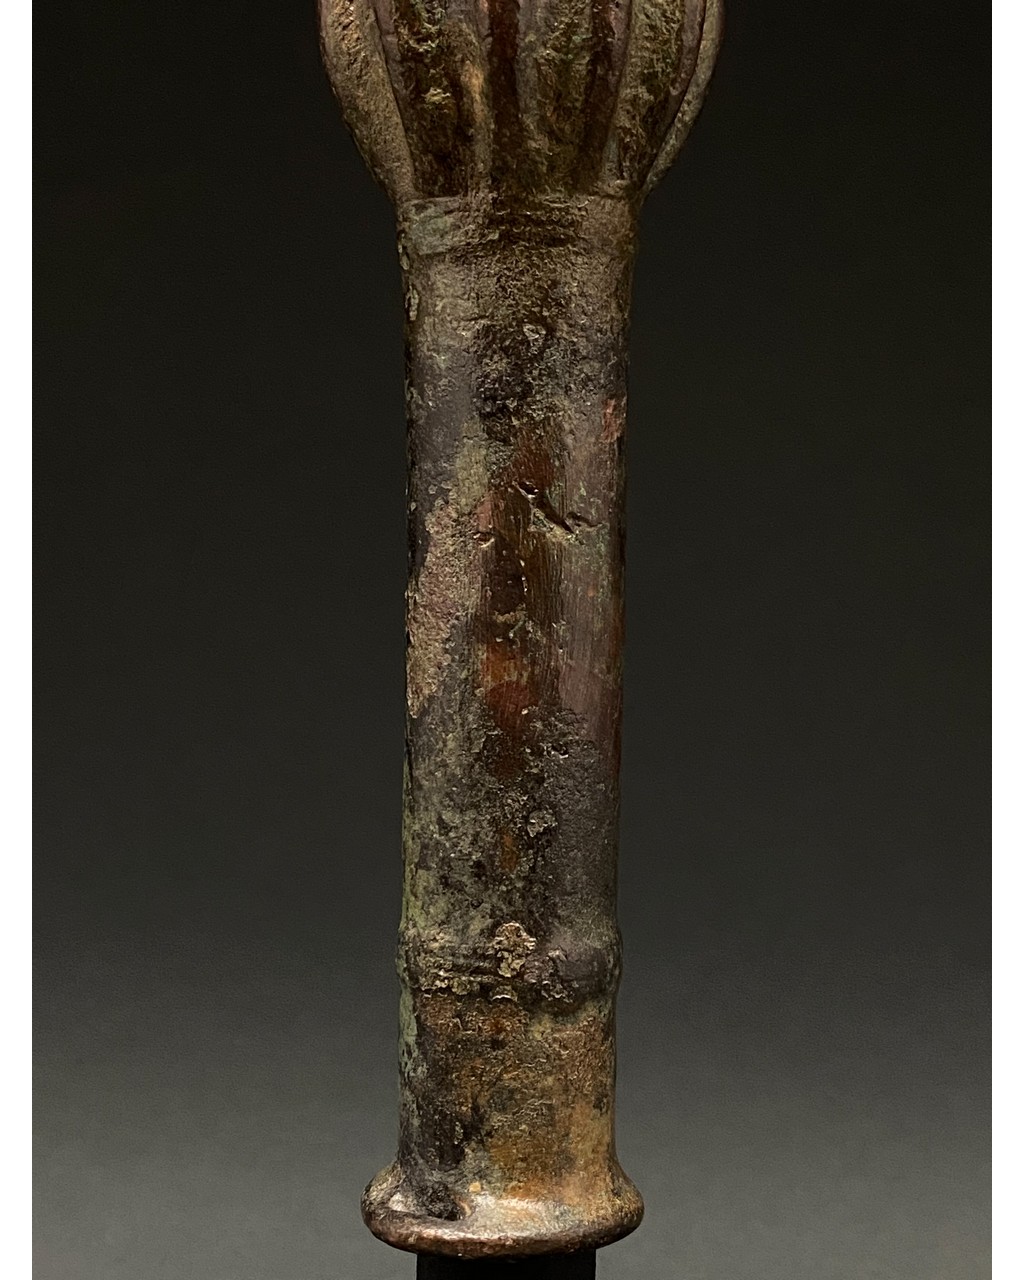 BRONZE AGE DECORATED MACE HEAD ON STAND - Image 3 of 6